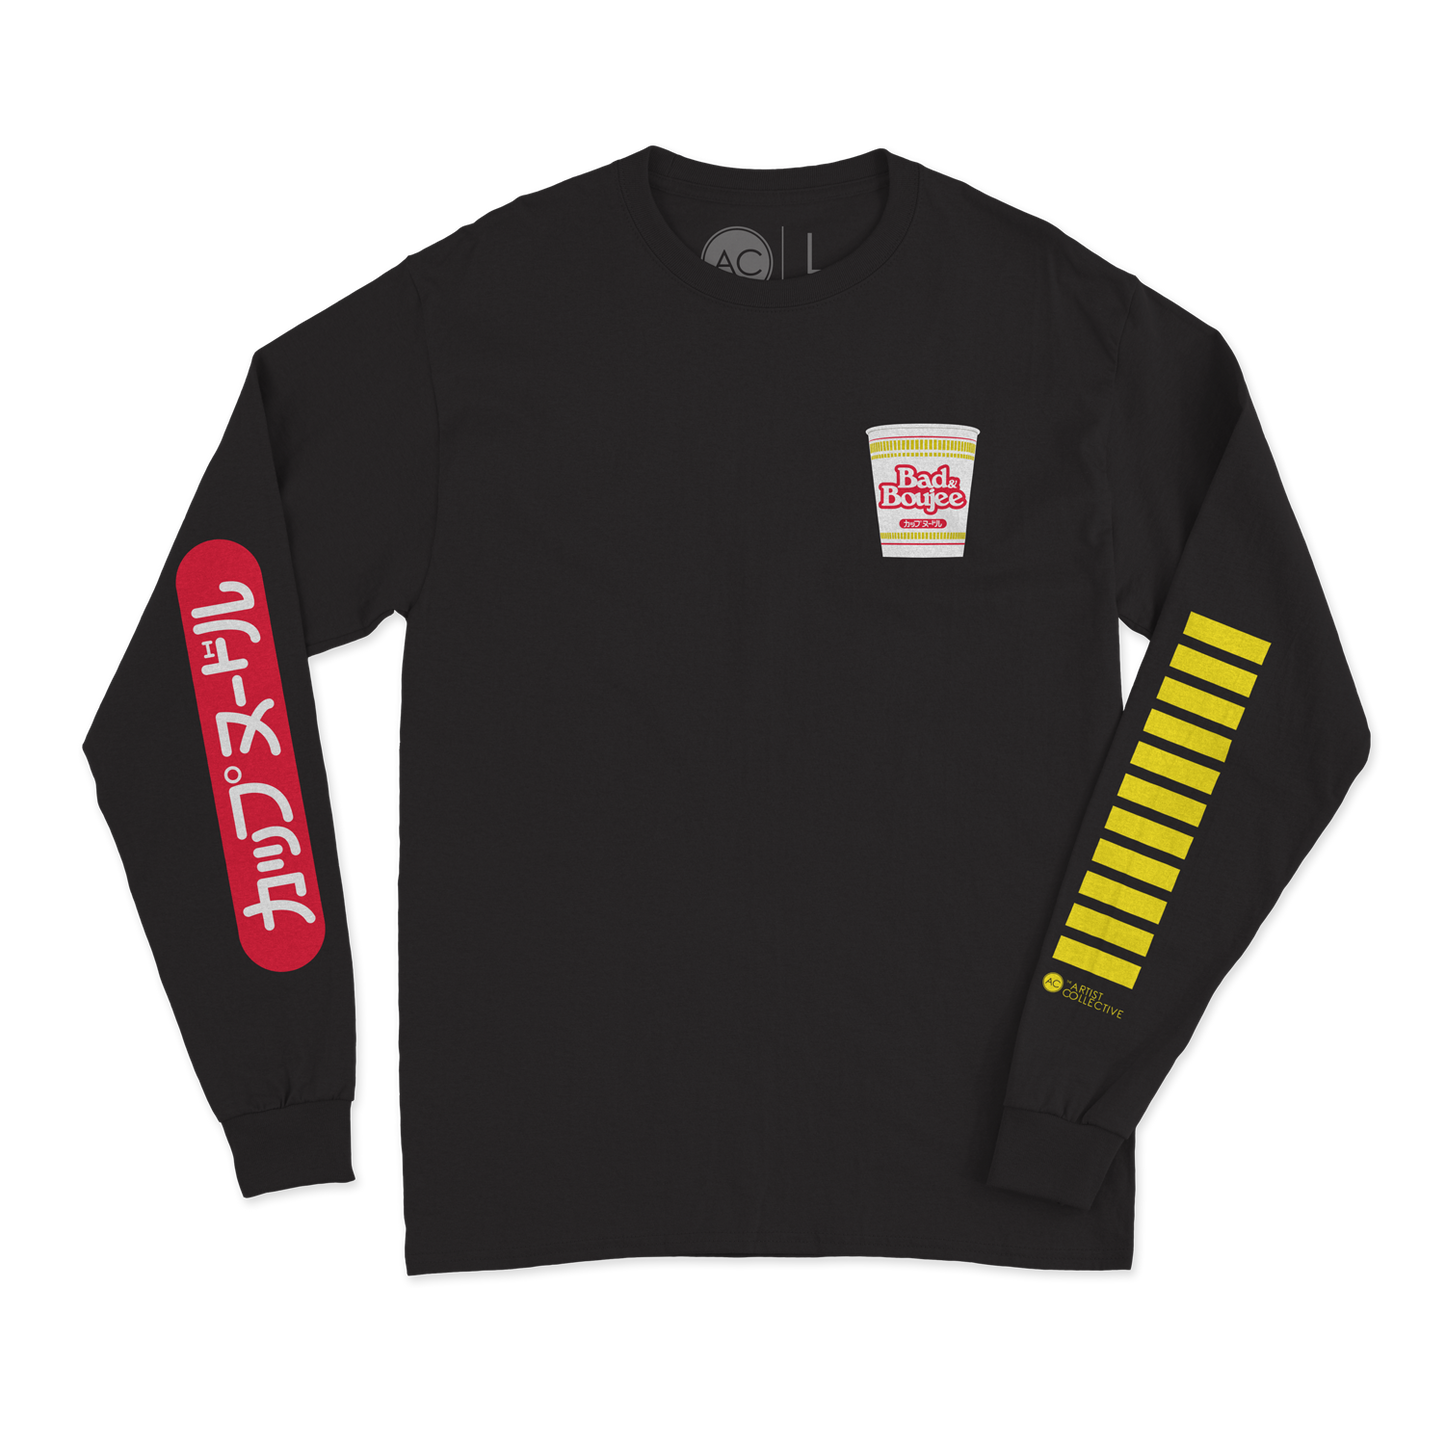 Boujee Cup L/S Shirt - Black